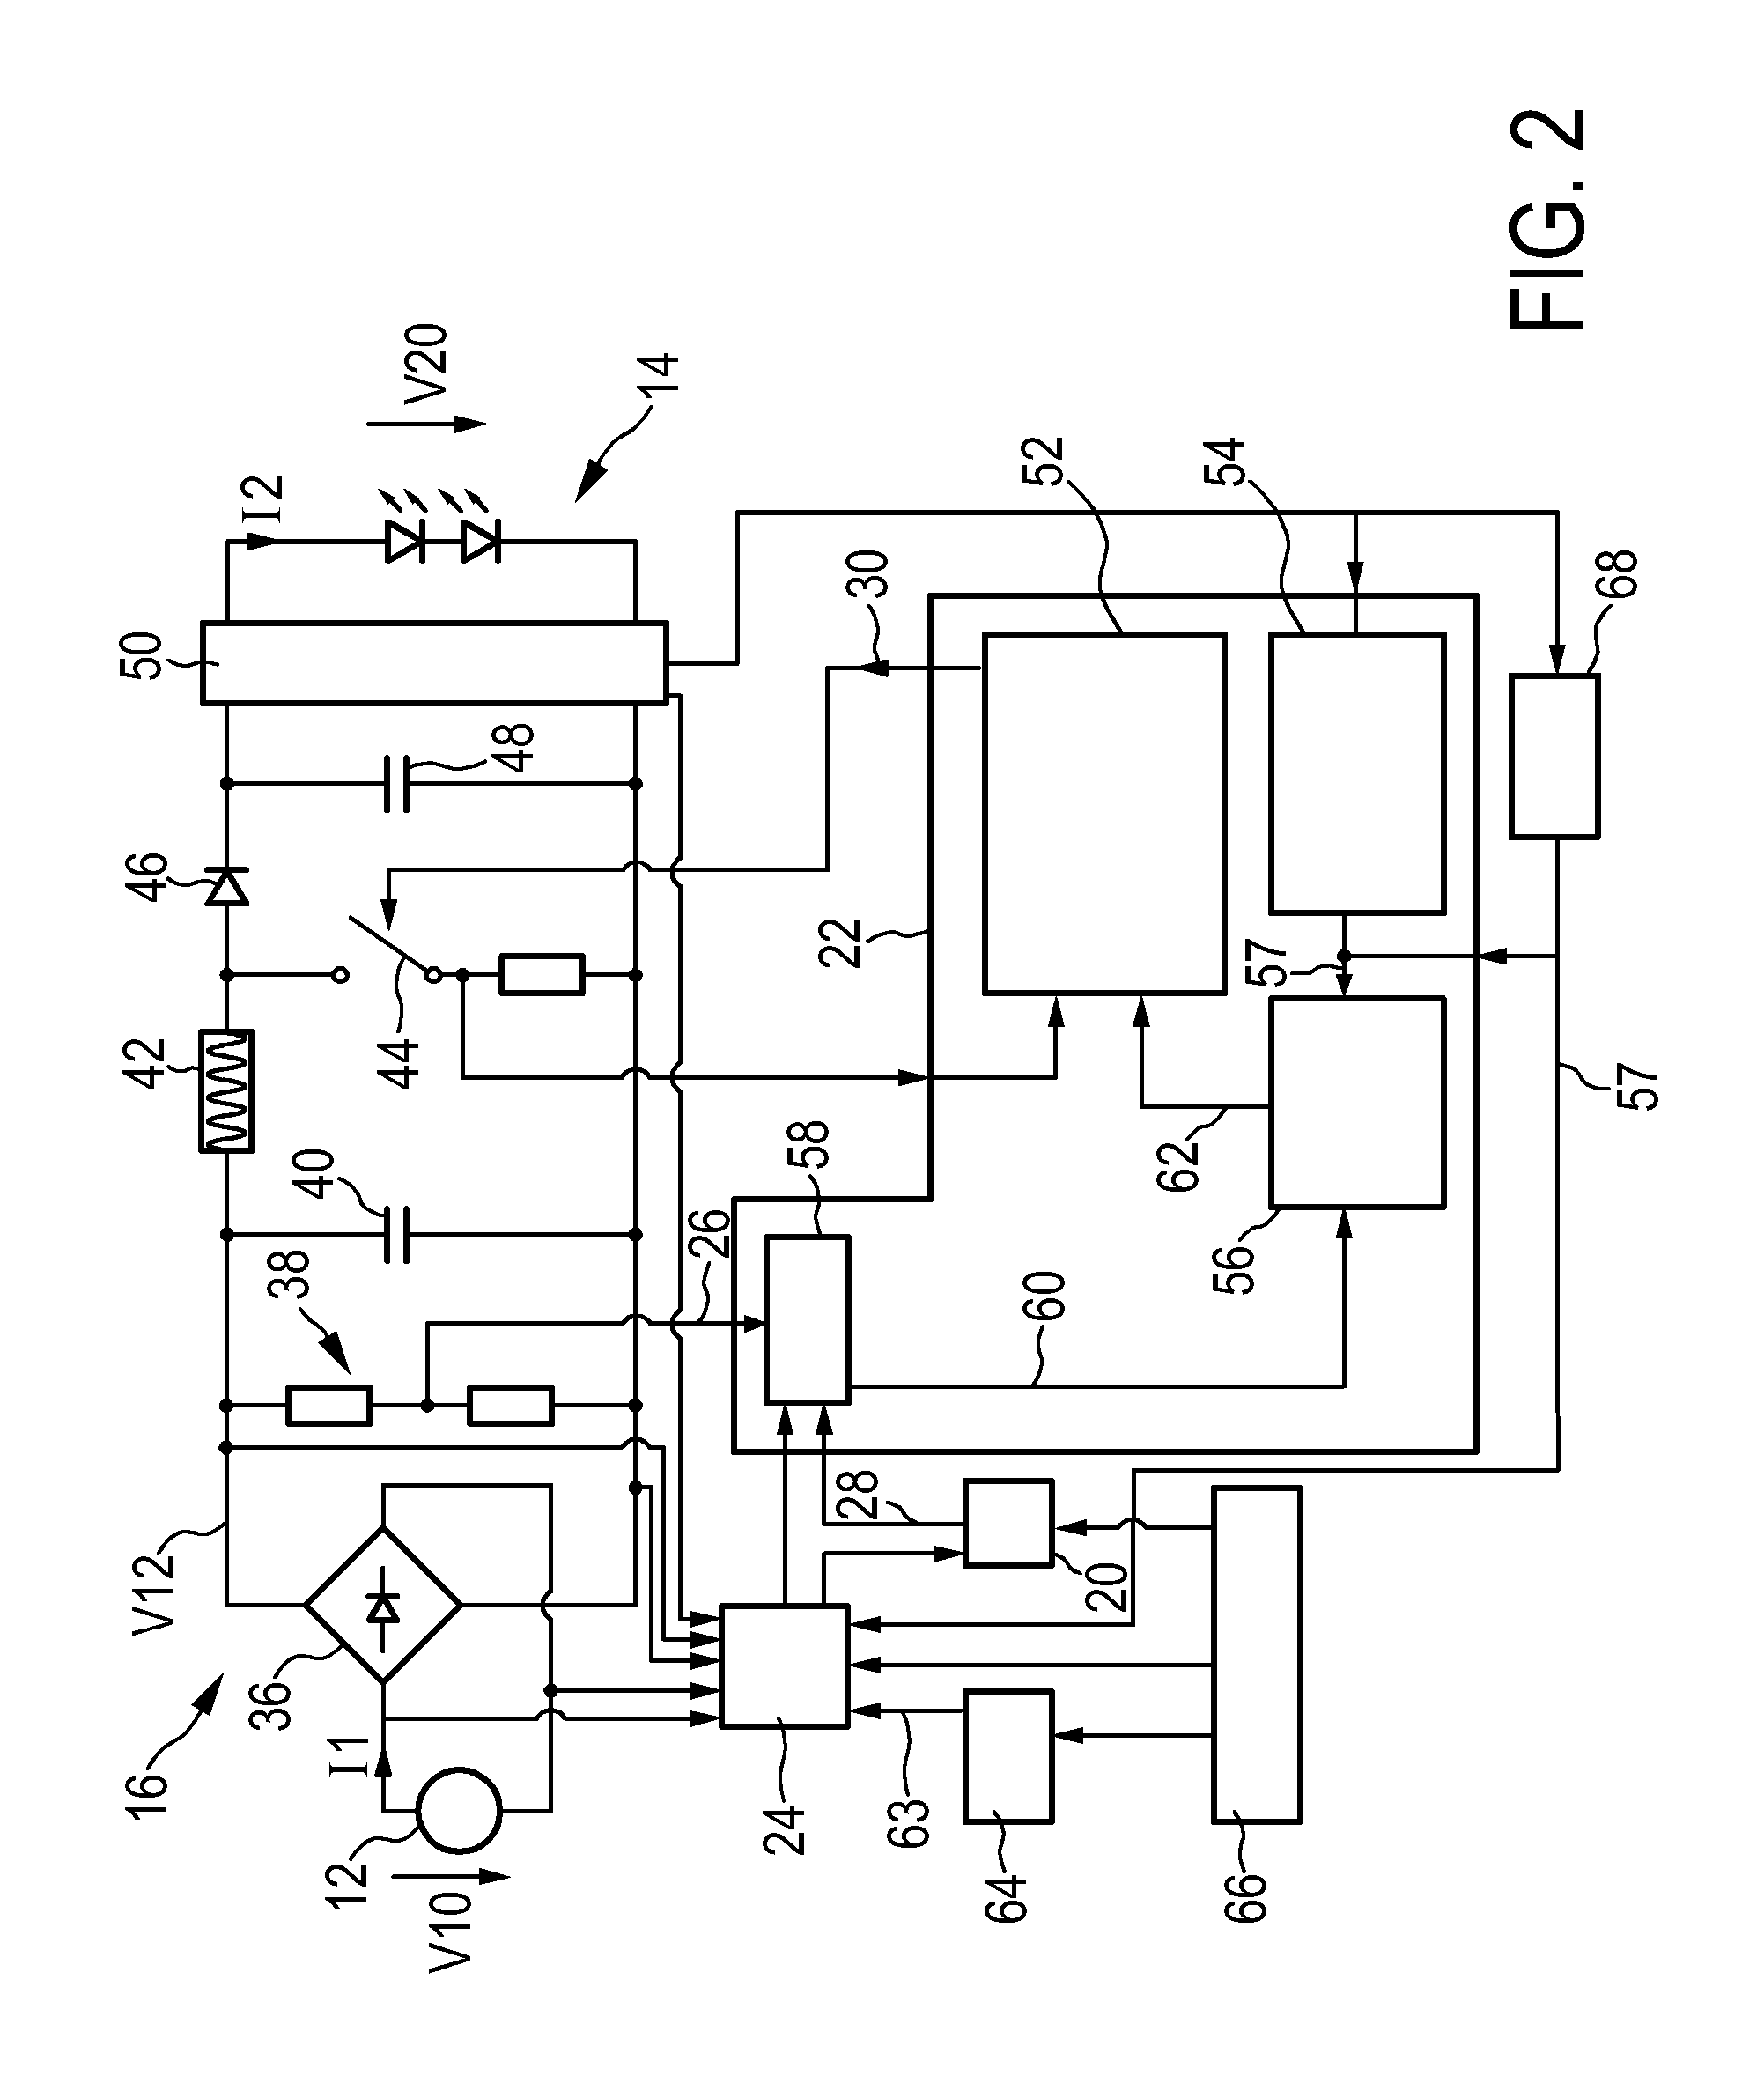 Driver device and driving method for driving a load, in particular a light unit